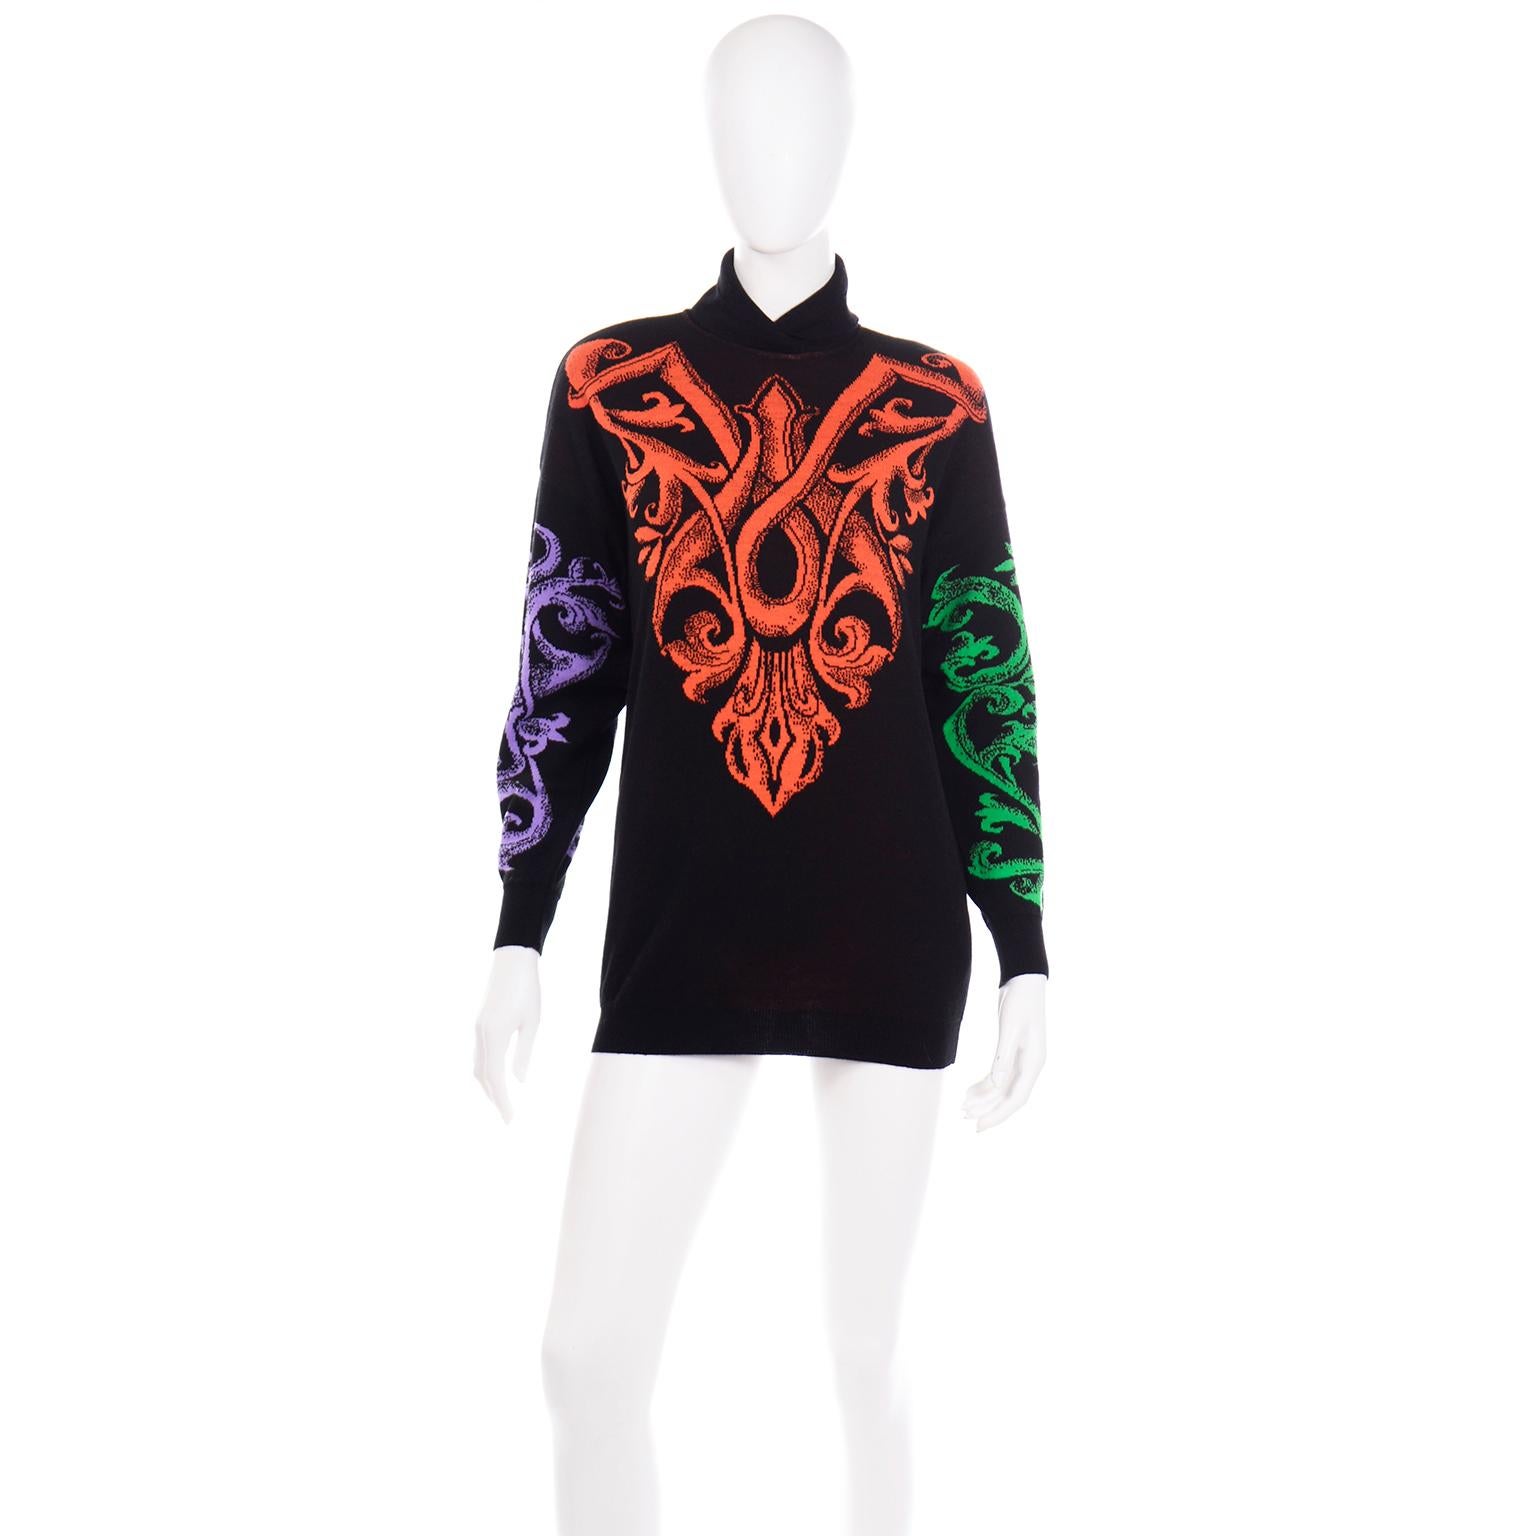 This vintage 1980's or early 1990's Gianni Versace wool knit sweater has beautiful and bright colorful woven abstract baroque details in shades of orange, green, red and purple. The front of the sweater has an orange design, the back has a red one,